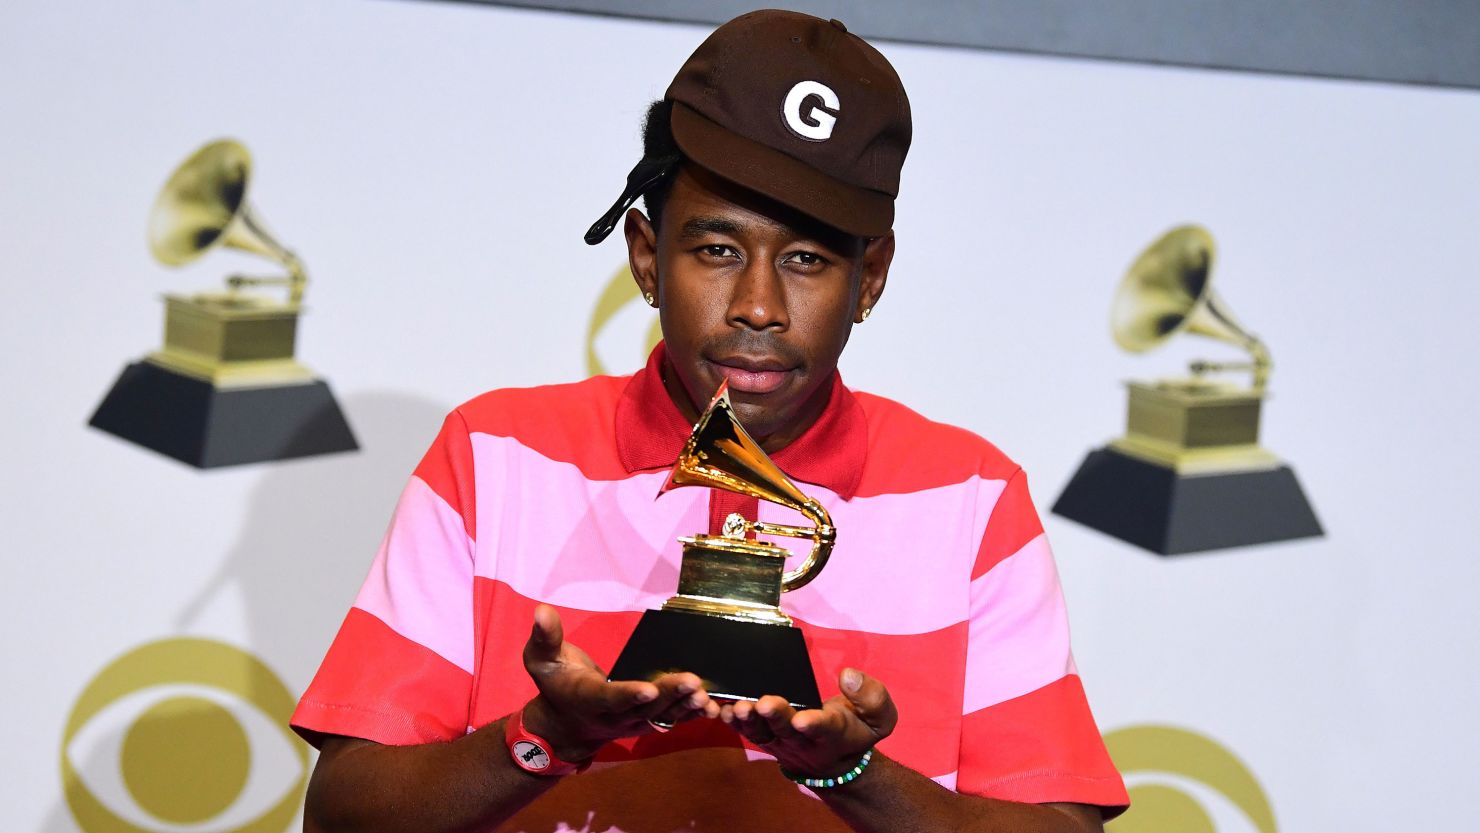 do what makes you happy tyler the creator